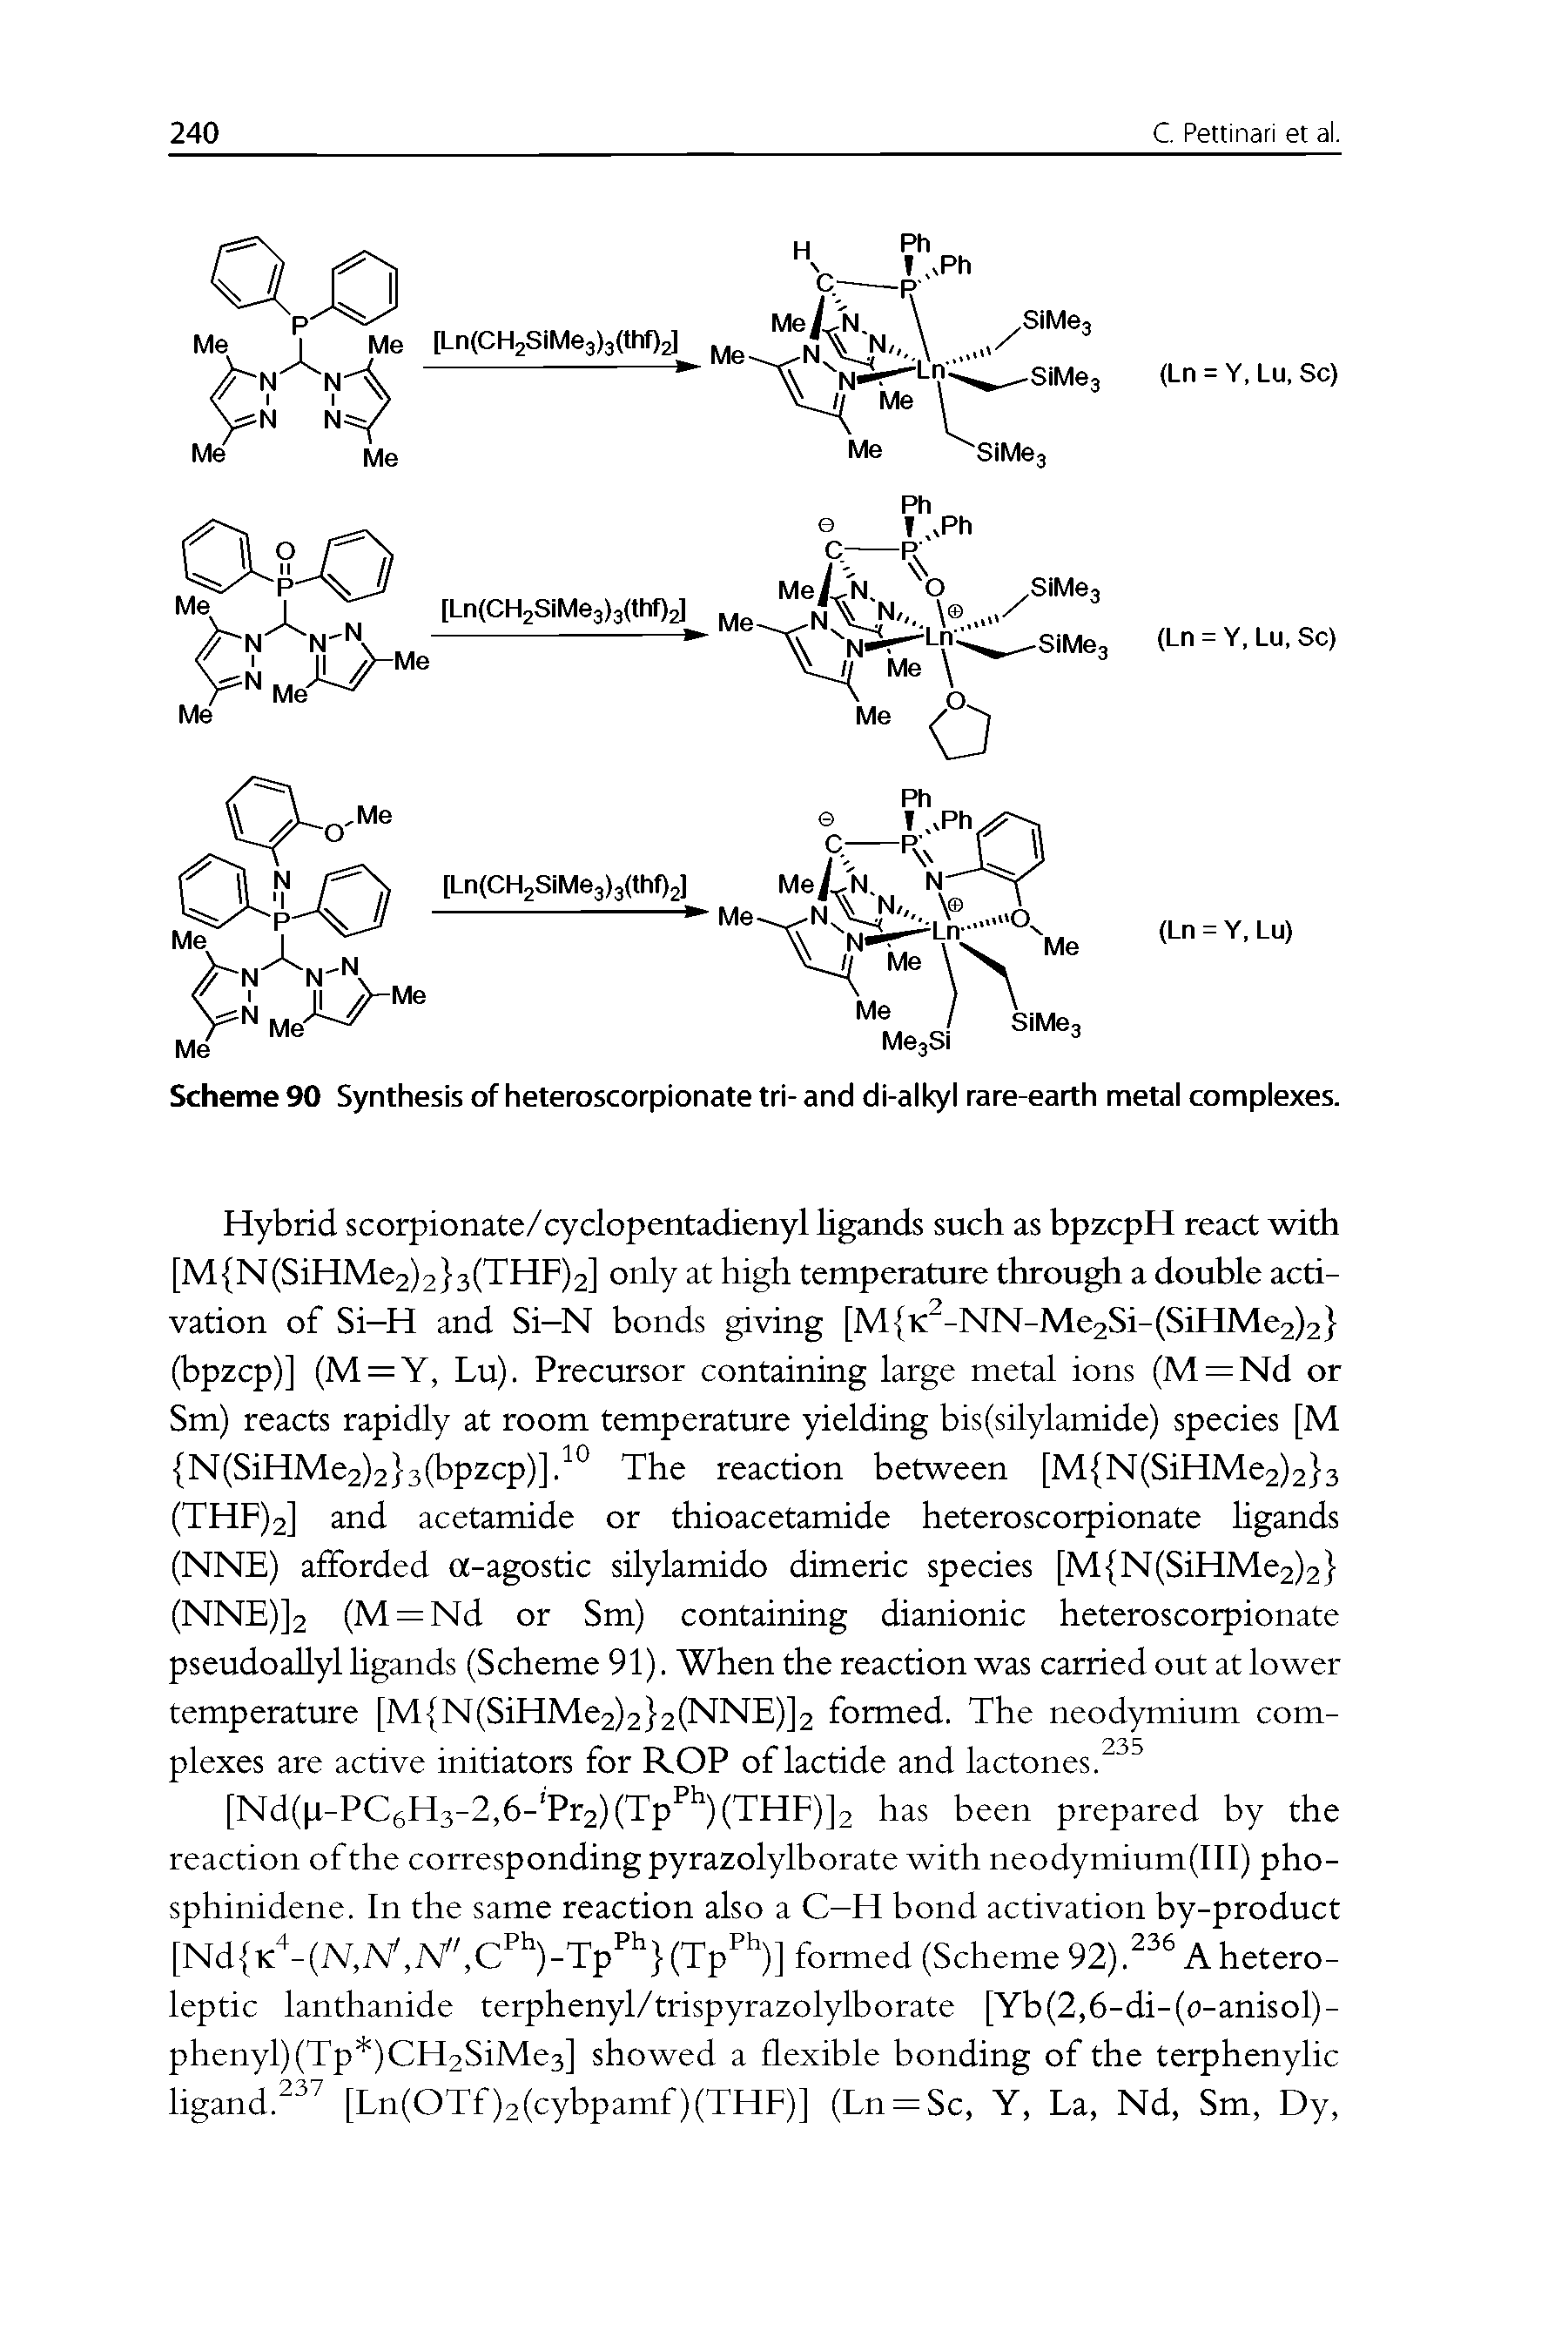 Scheme 90 Synthesis of heteroscorpionate tri- and di-alkyl rare-earth metal complexes.